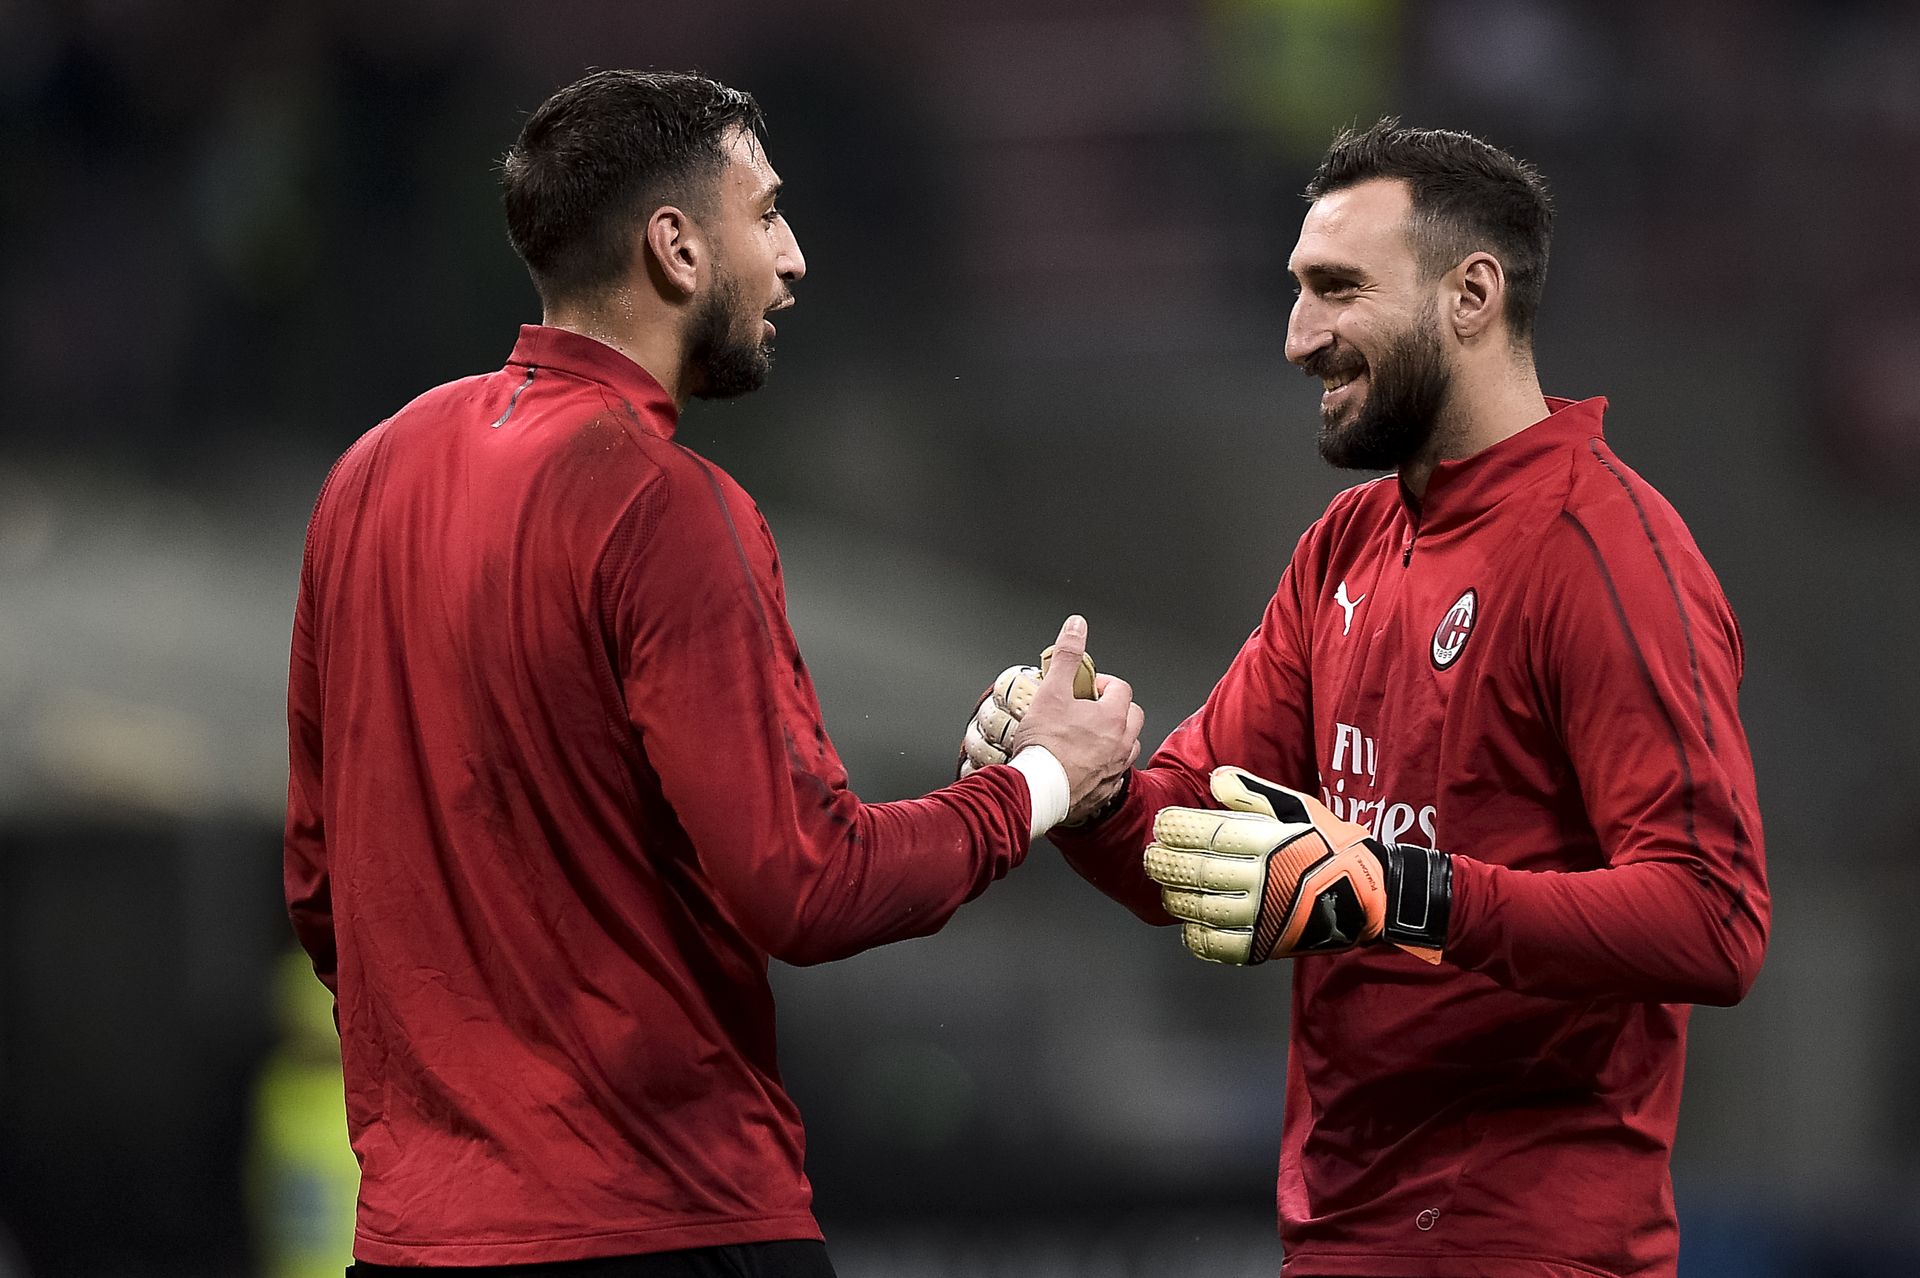 <p>                     Gianluigi Donnarumma became Italy's first-choice goalkeeper following Gianluigi Buffon's retirement and is considered one of the world's best in his position.                   </p>                                      <p>                     His older brother Antonio is also a goalkeeper and the two spent four seasons together at AC Milan. He made just three appearances in that time, but all three games were 1-0 wins (one after extra time) and he therefore became the first goalkeeper in the club's history to reach 300 minutes without letting in a goal.                   </p>